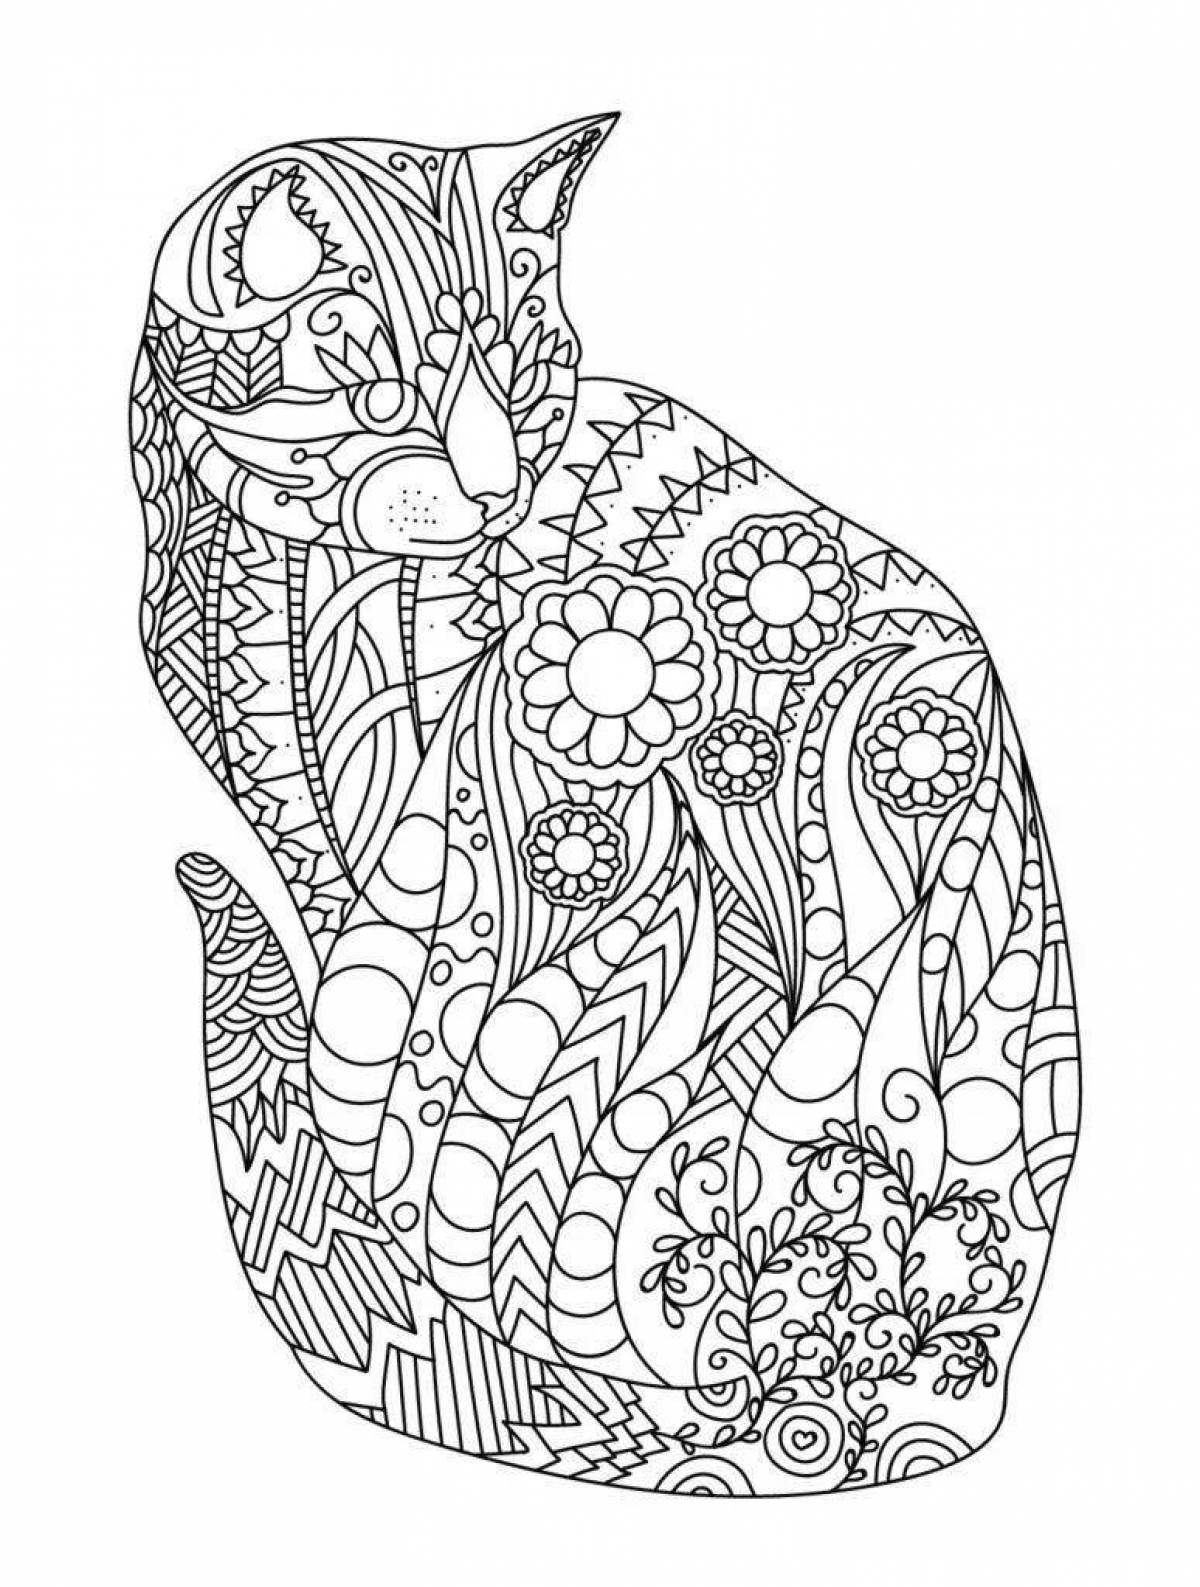 Invigorating psychological coloring book for adults